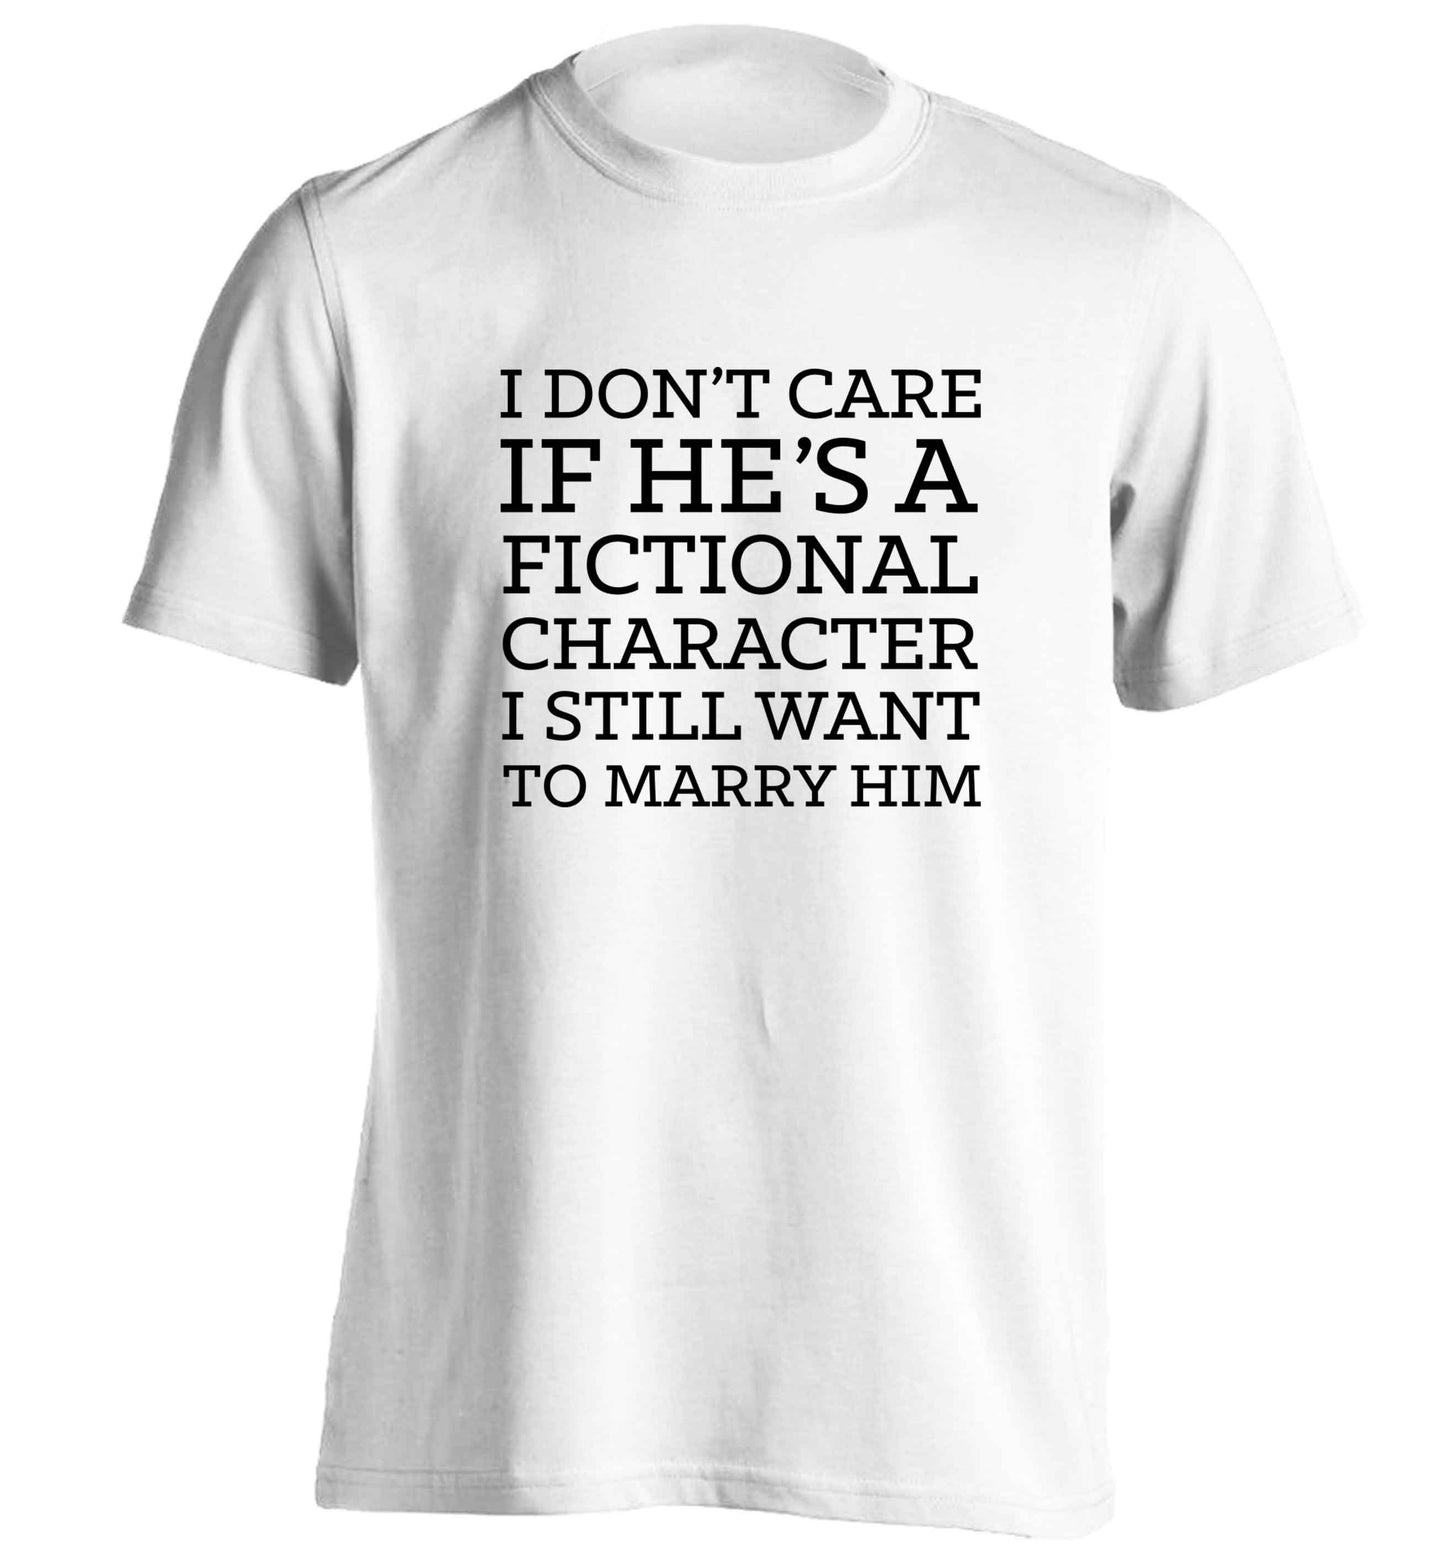 I don't care if he's a fictional character I still want to marry him adults unisex white Tshirt 2XL